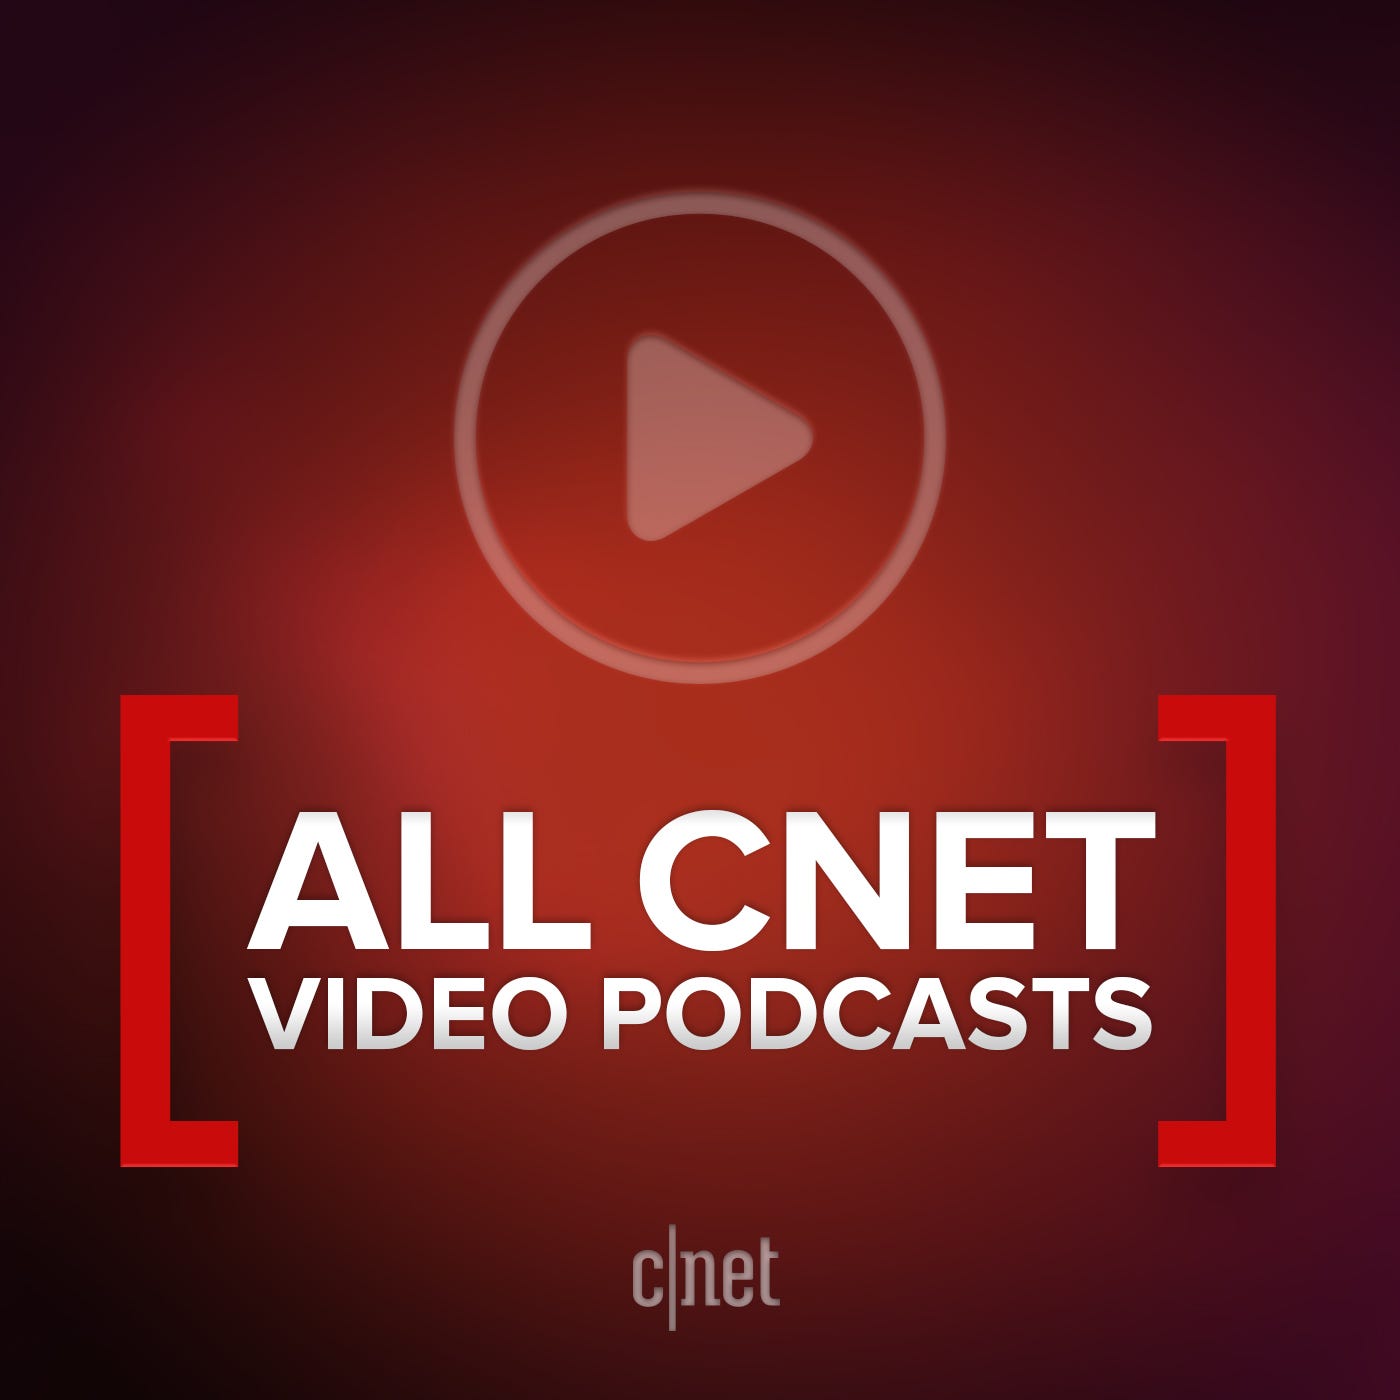 All CNET Video Podcasts (HQ)